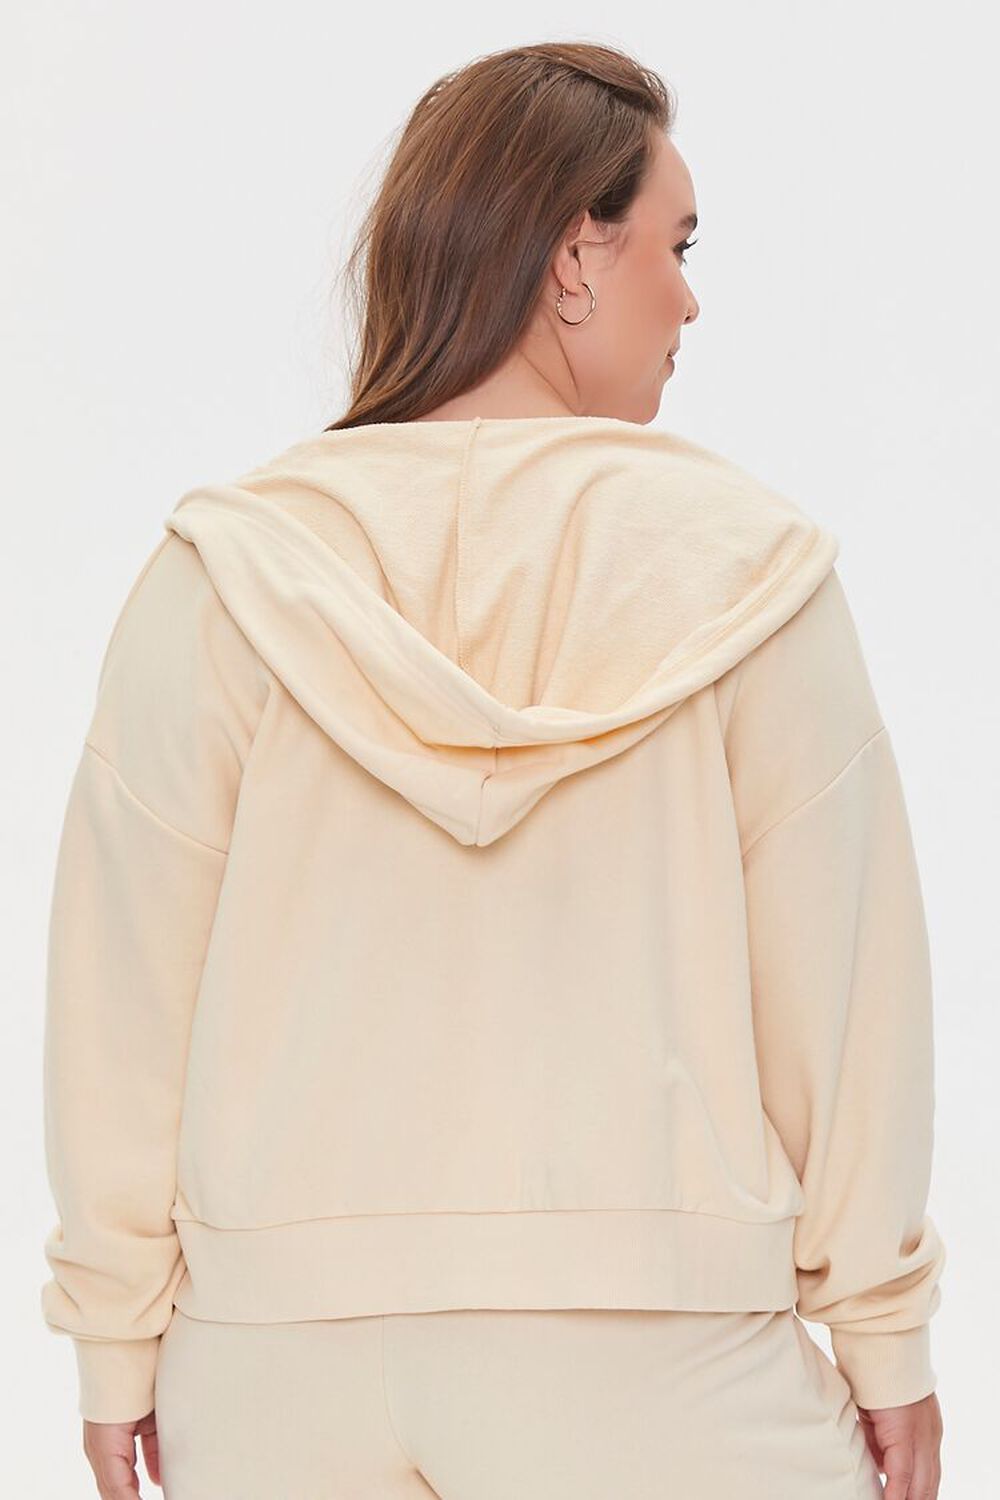 SAND Plus Size French Terry Zip-Up Hoodie, image 3